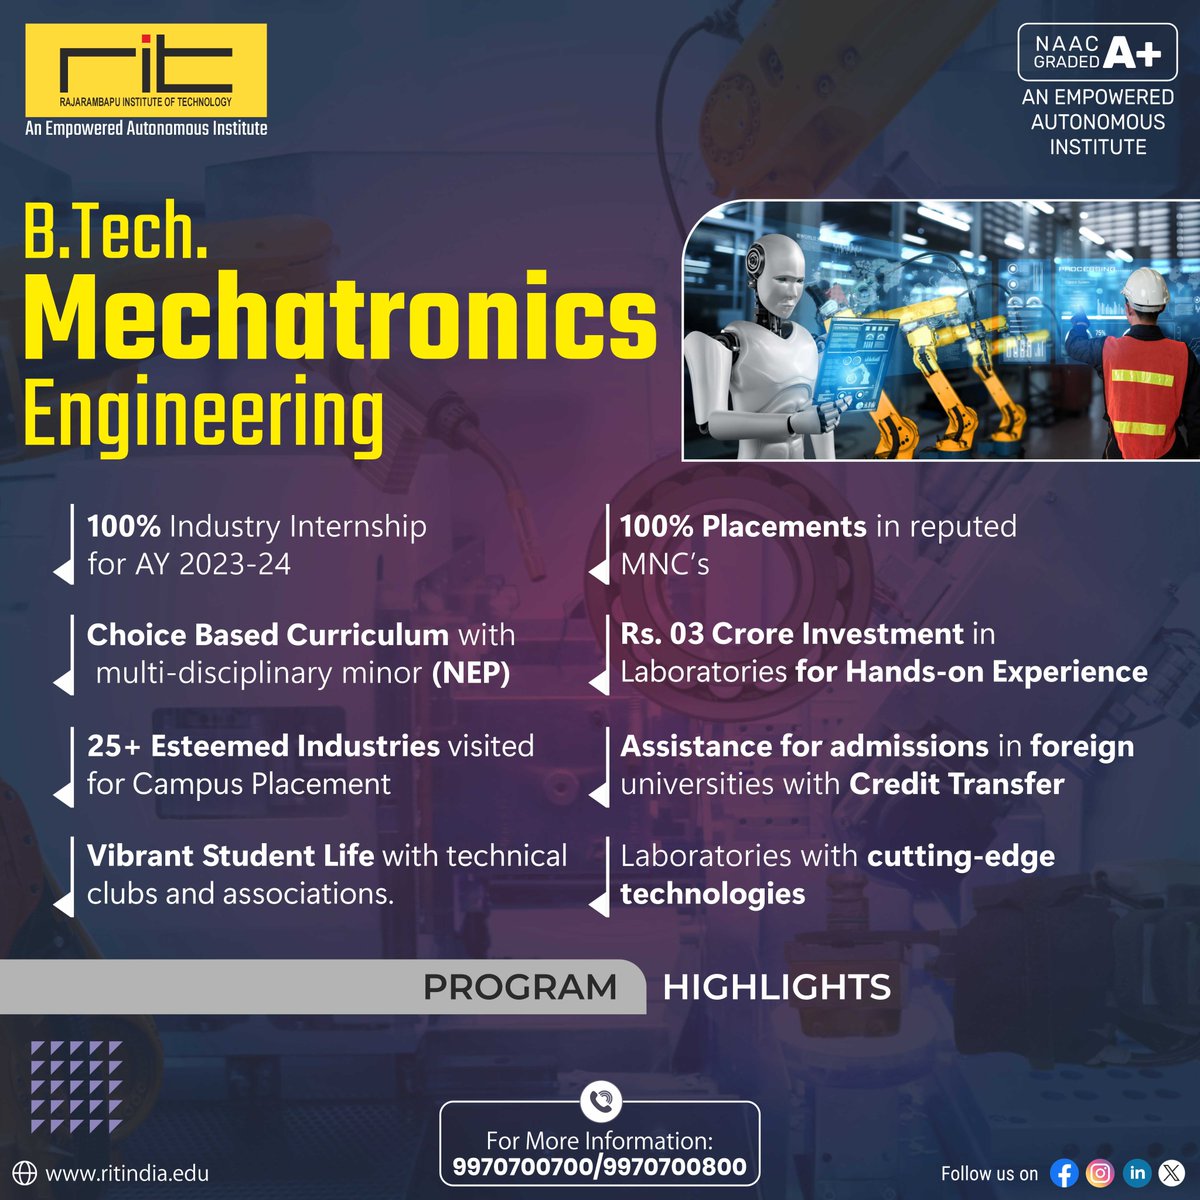 Transform the world with our Mechatronics Engineering program! Dive into the exciting blend of mechanics, electronics, and robotics. Apply now and become a leader in innovative technology! 🤖🔧 #EngineeringAdmissions #Mechatronics #TechLeaders